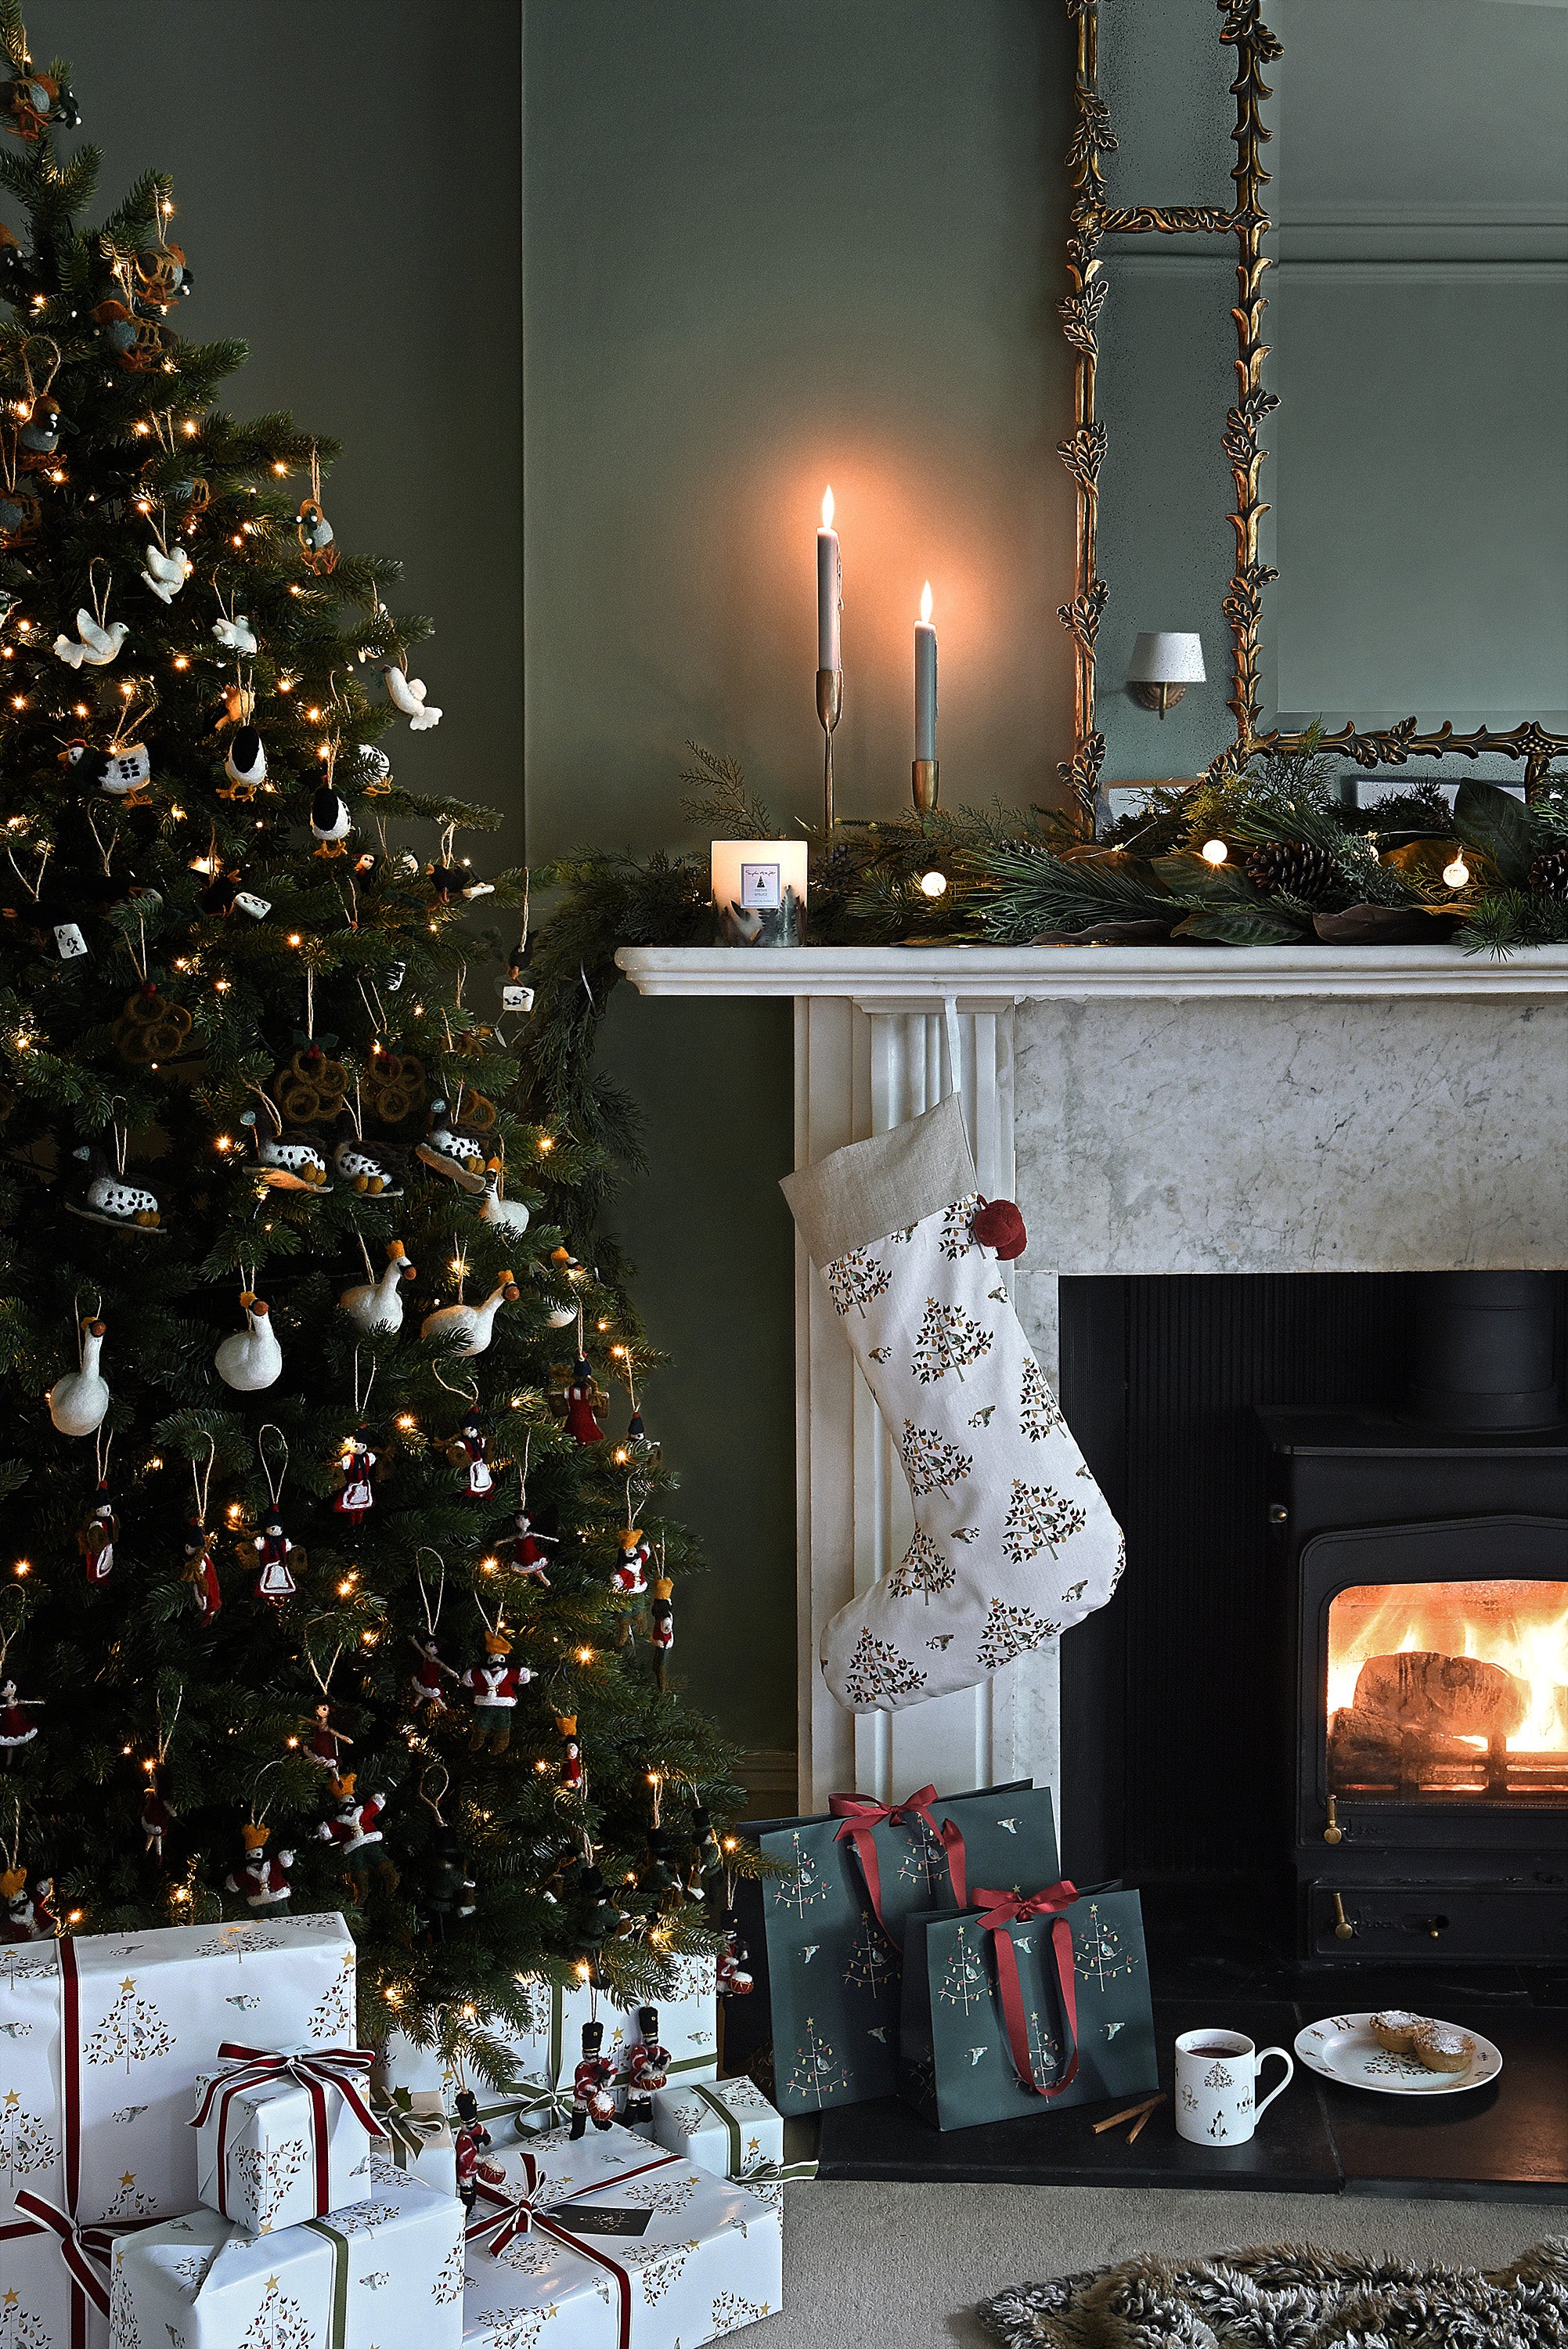 New Sophie Allport Christmas Collection - Partridge In A Pear Tree